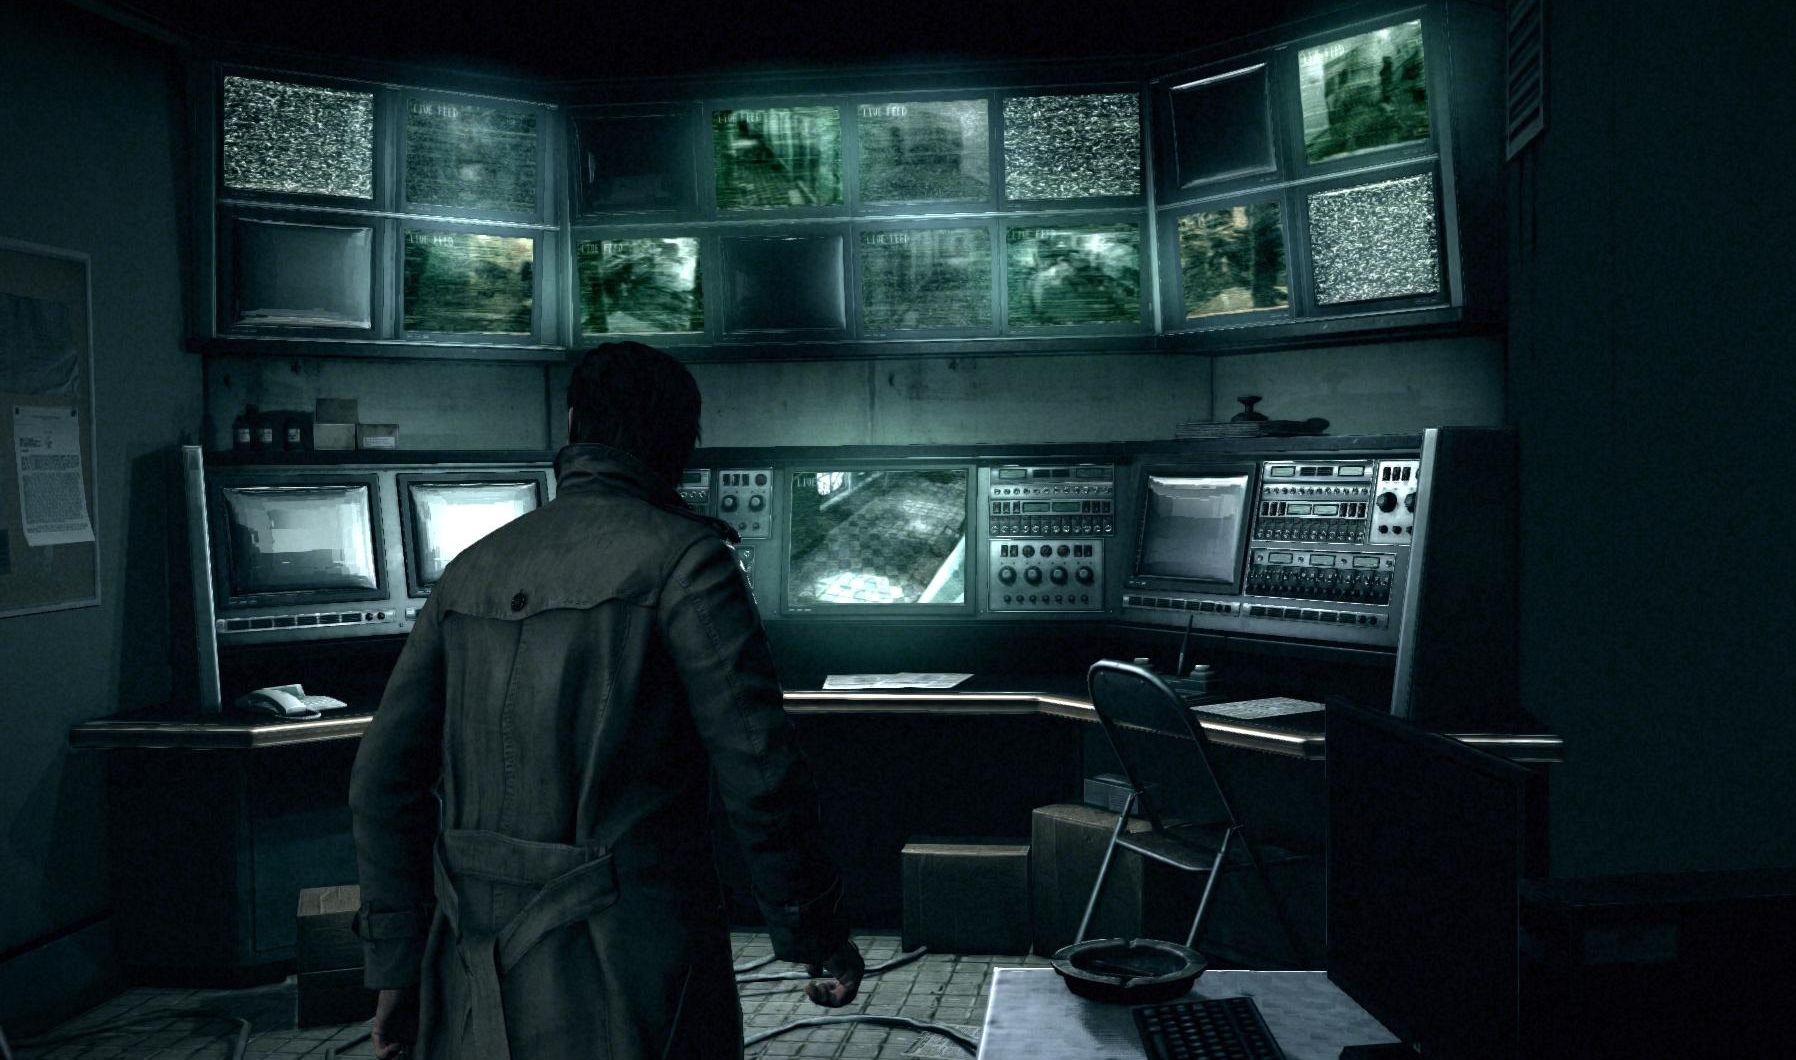 The Evil Within security room